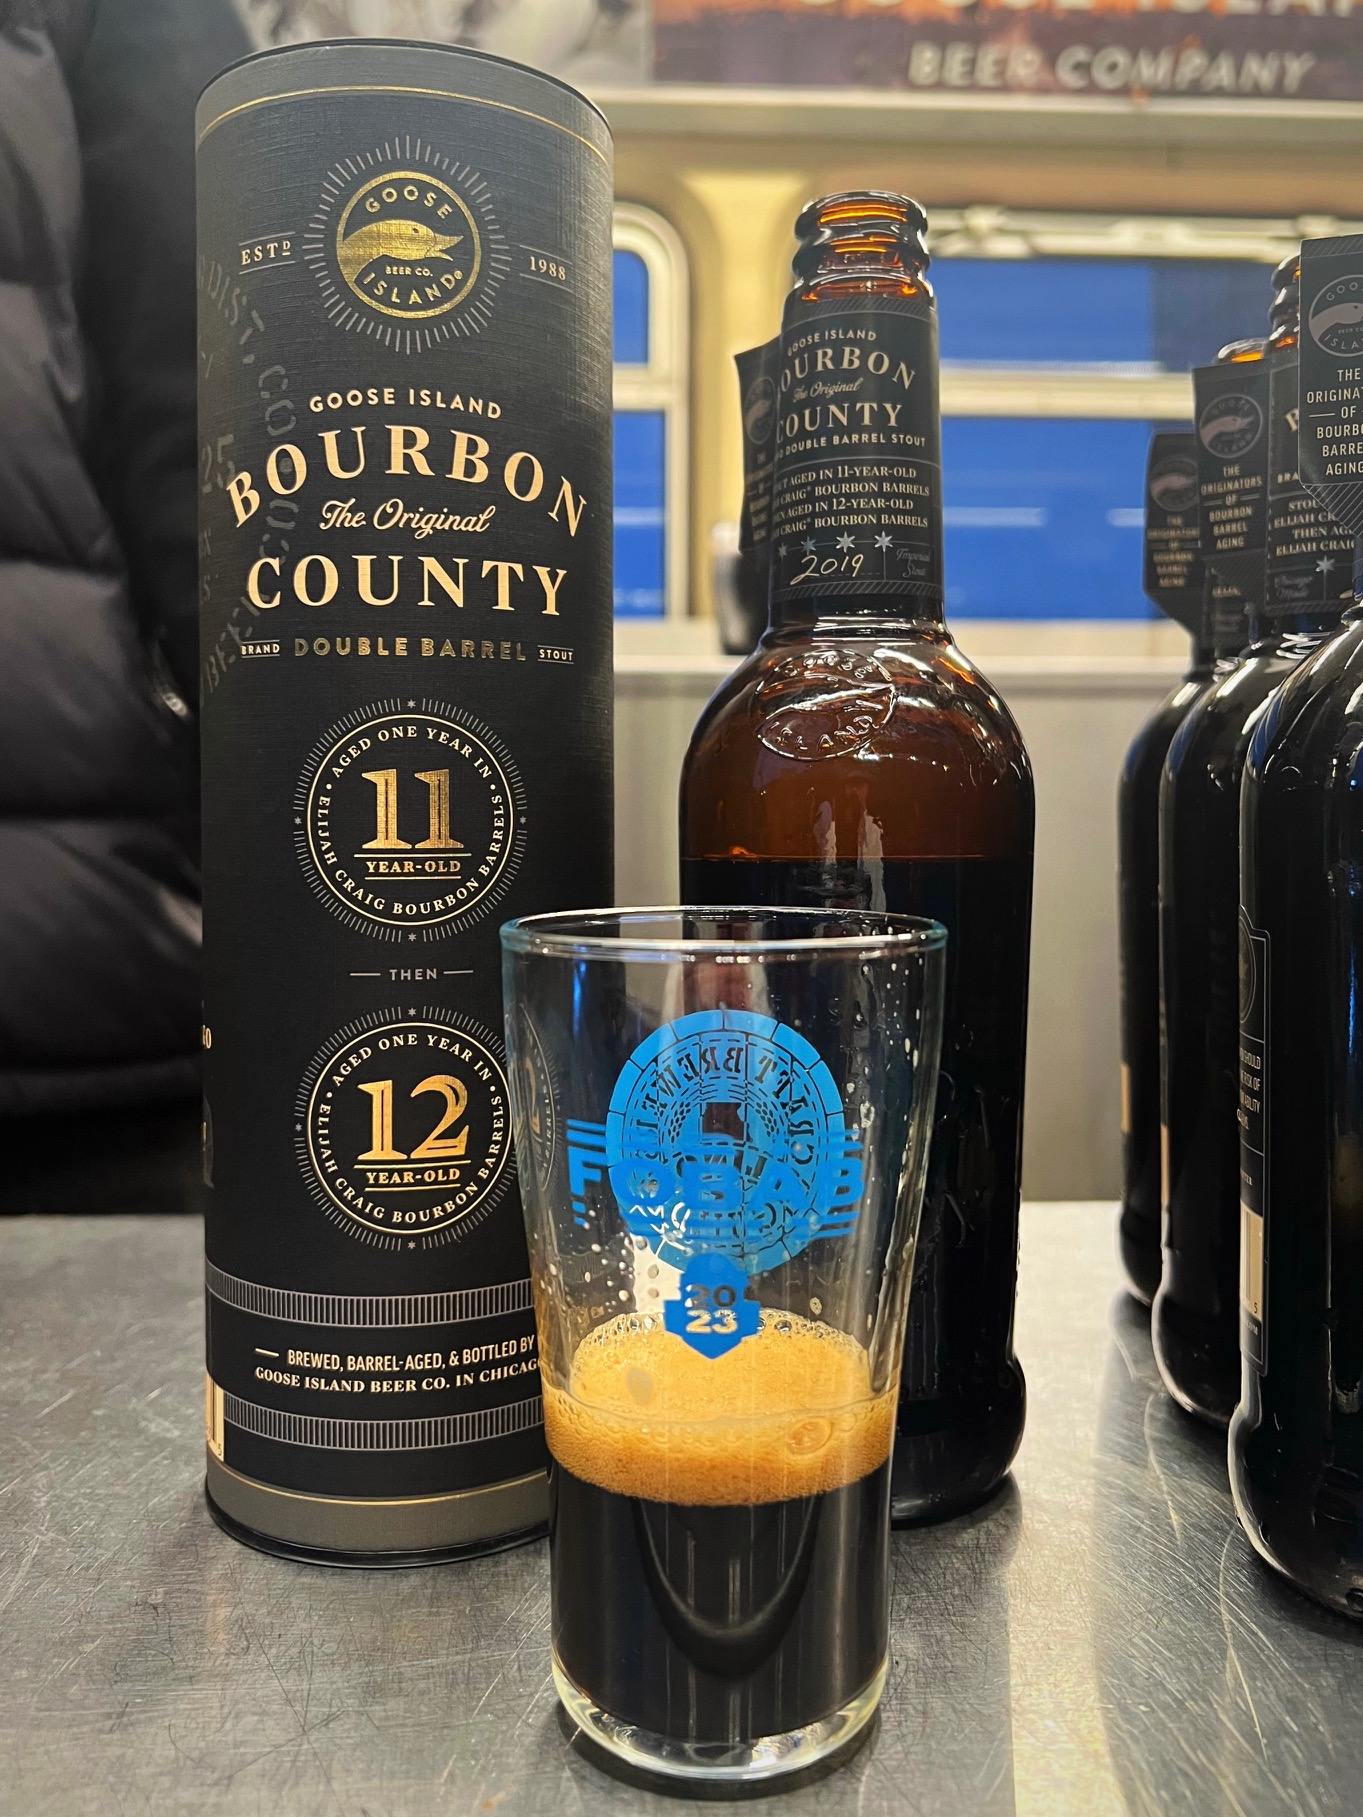 Goose Island Beer Co. Bourbon County Brand Double Barrel Stout being served at the 2023 Festival of Wood and Barrel Aged Beer.